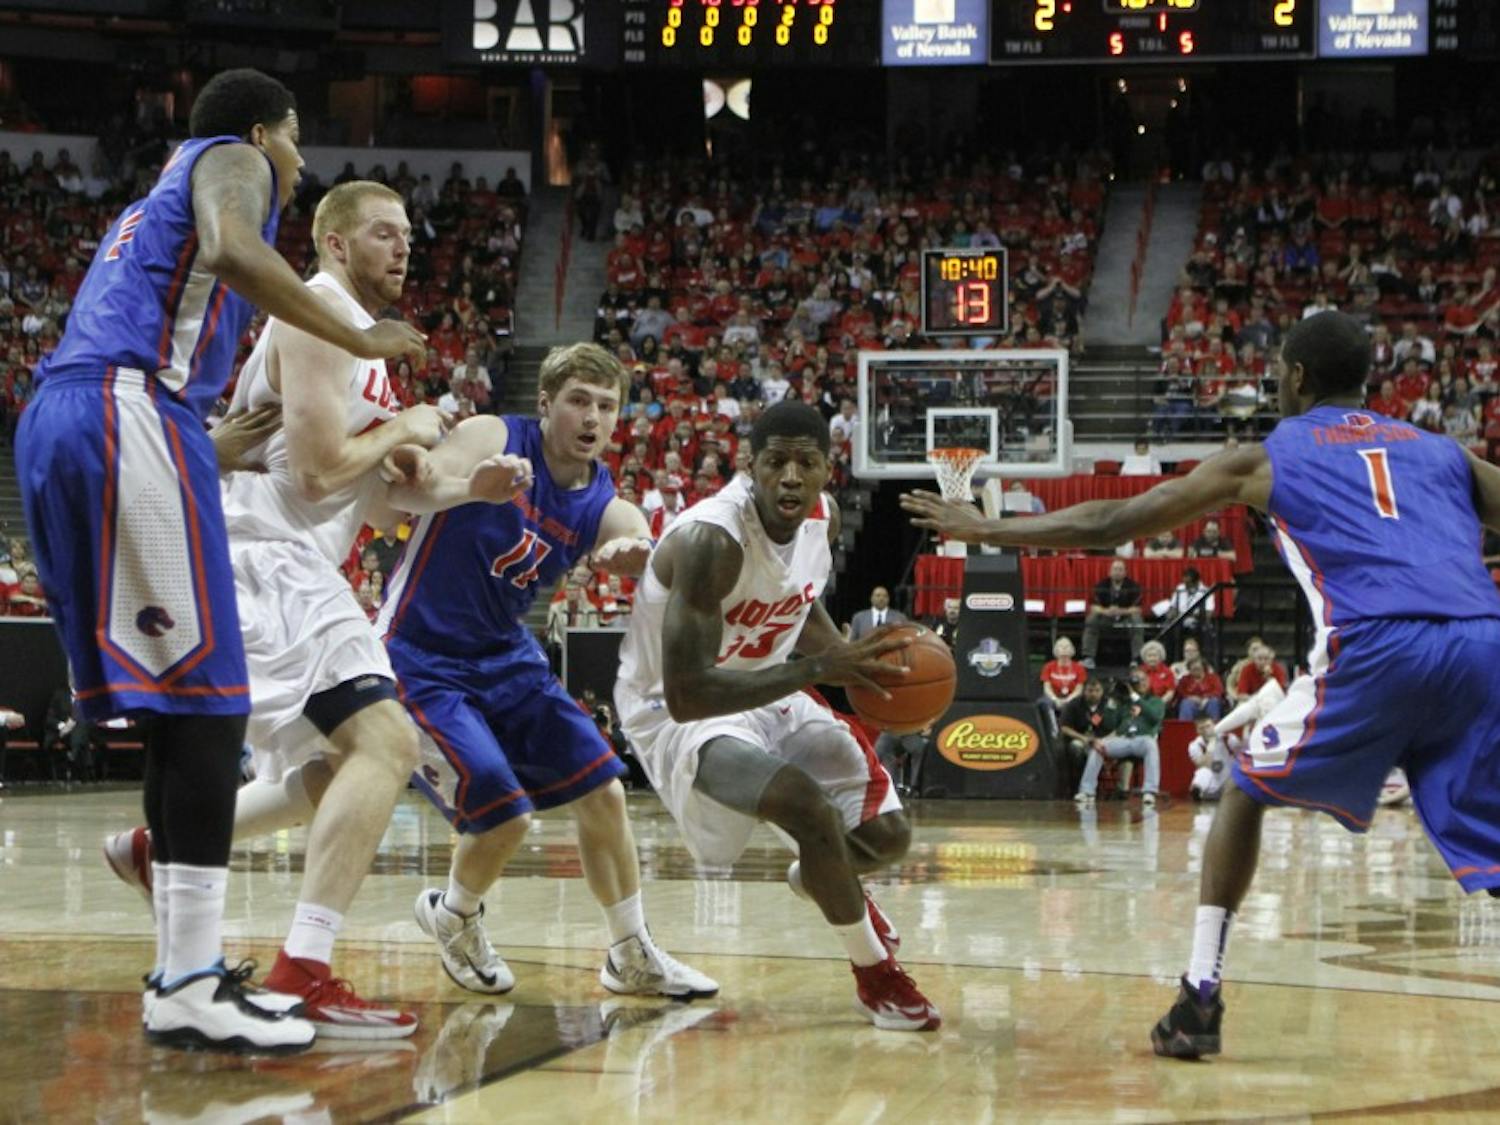 UNM vs Boise State Friday night at the Mountain West Tournament